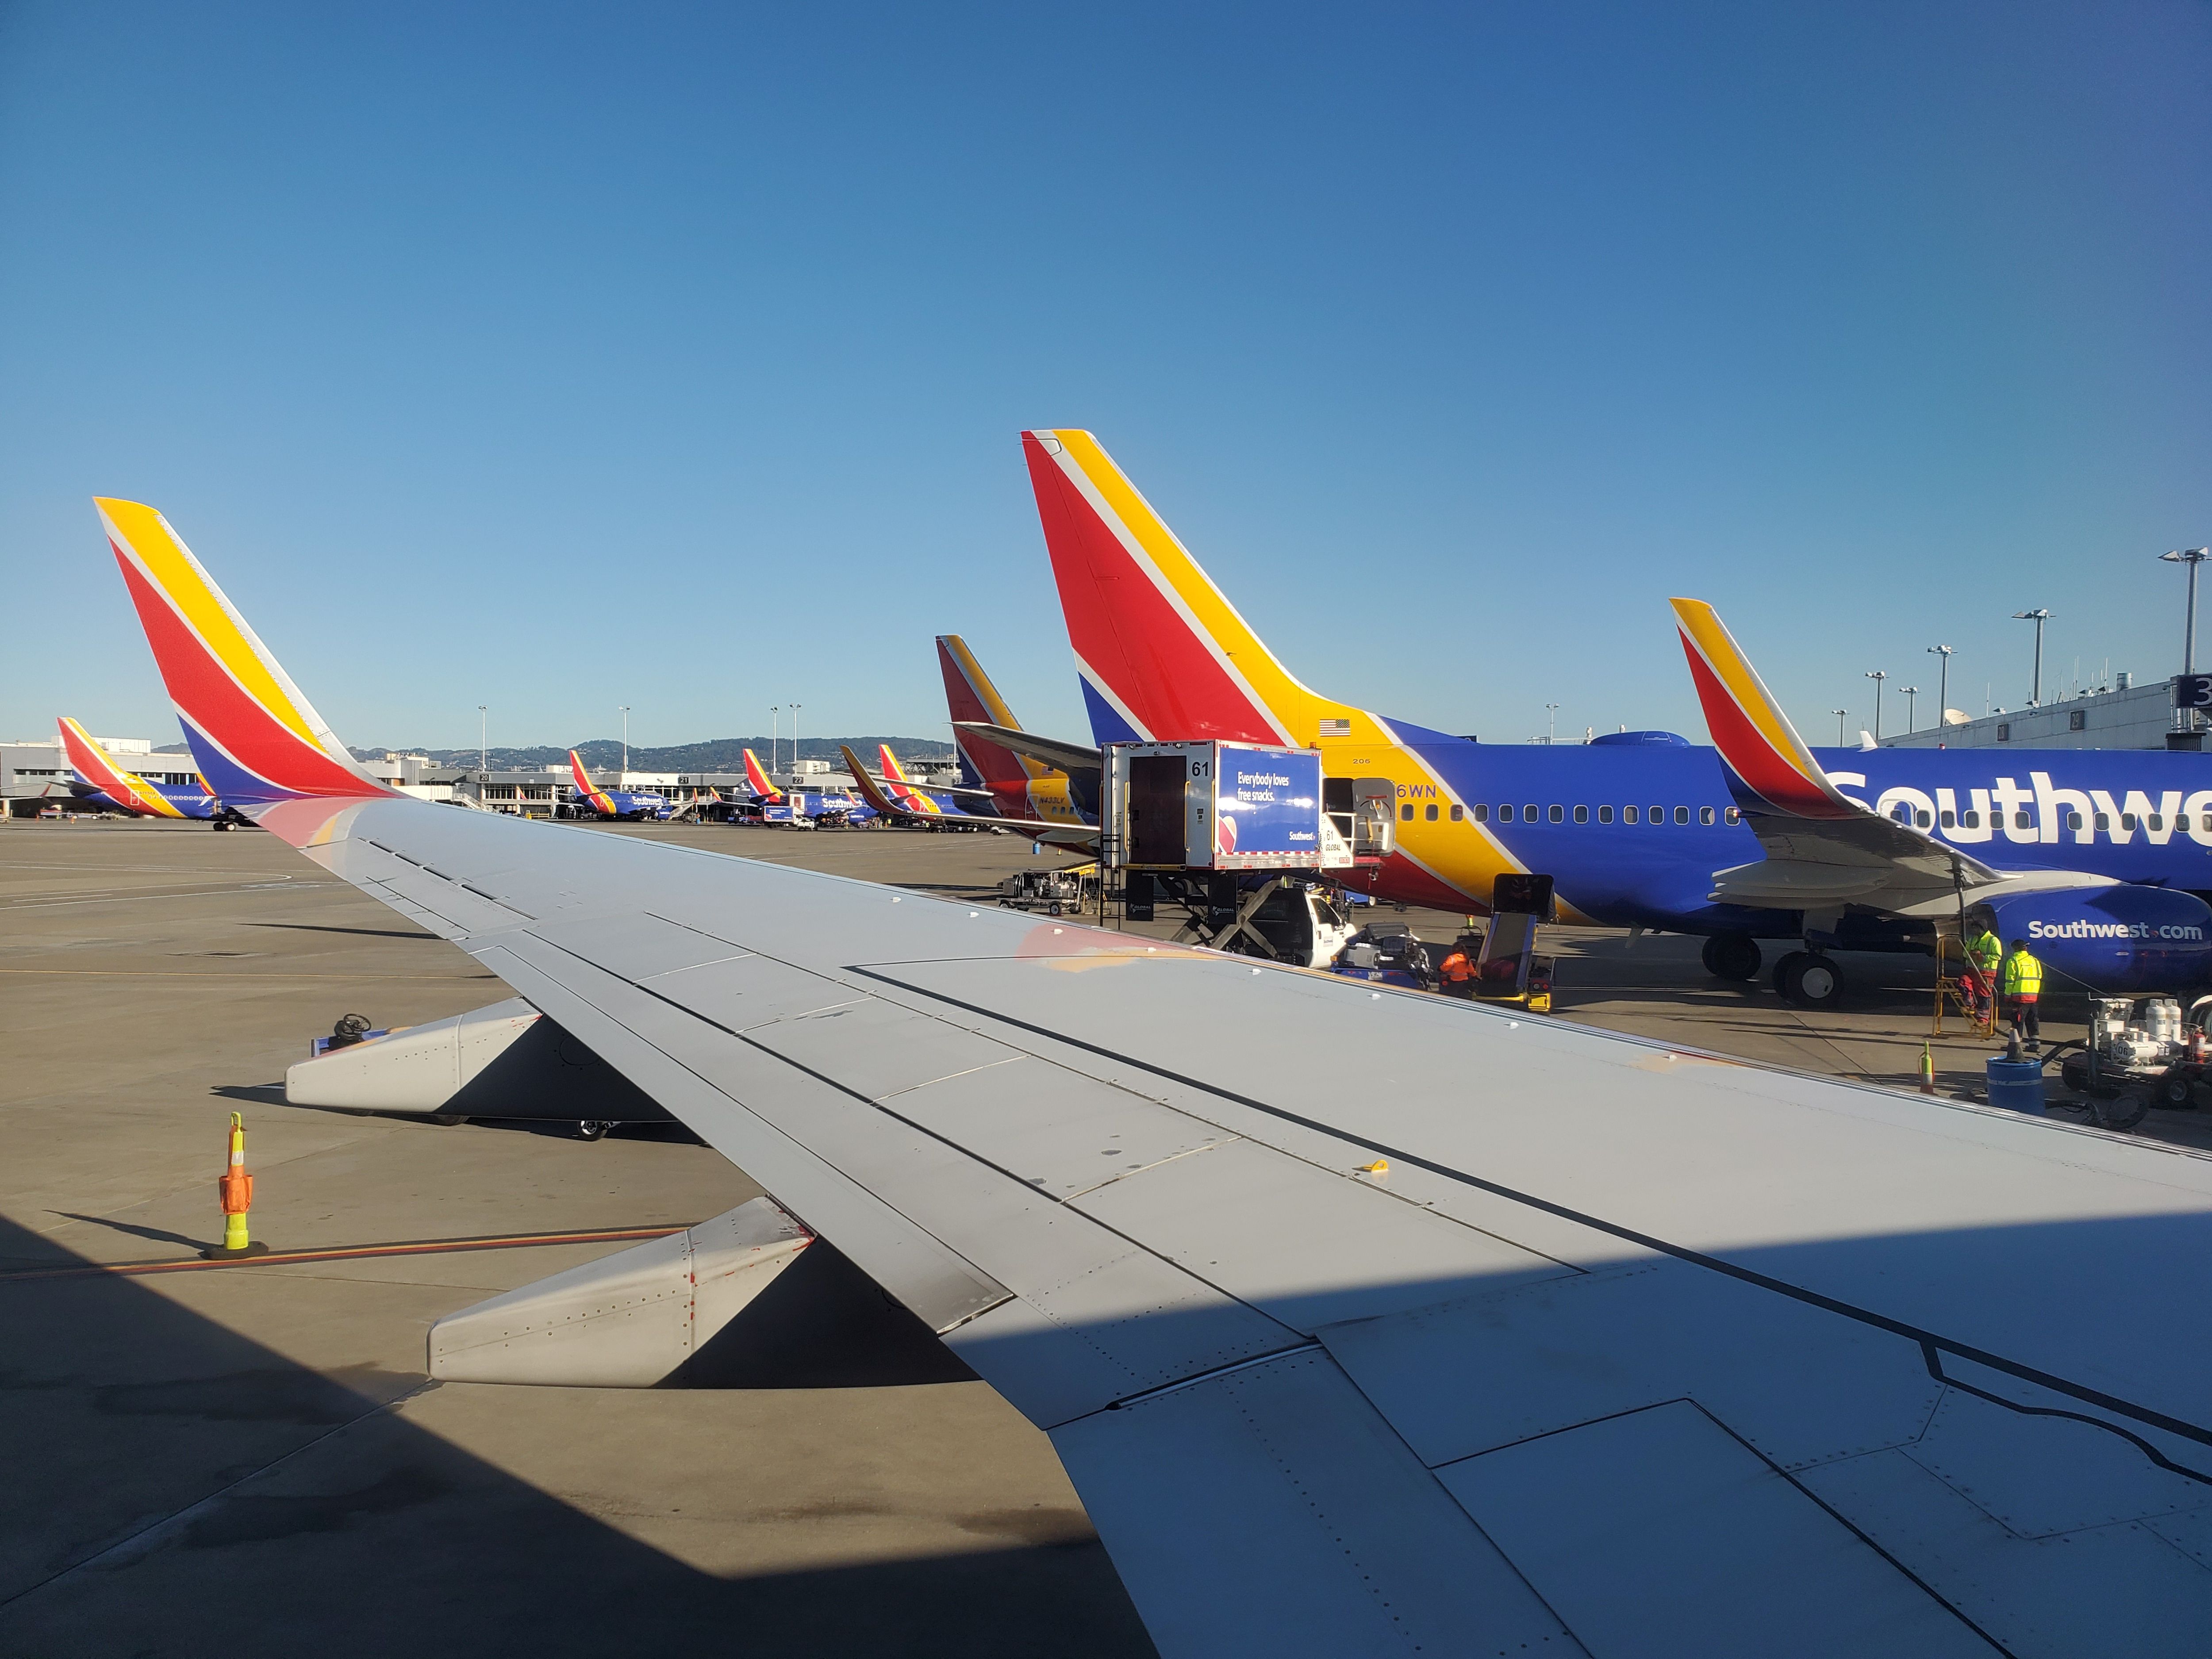 Wing of Southwest Airlines aircraft